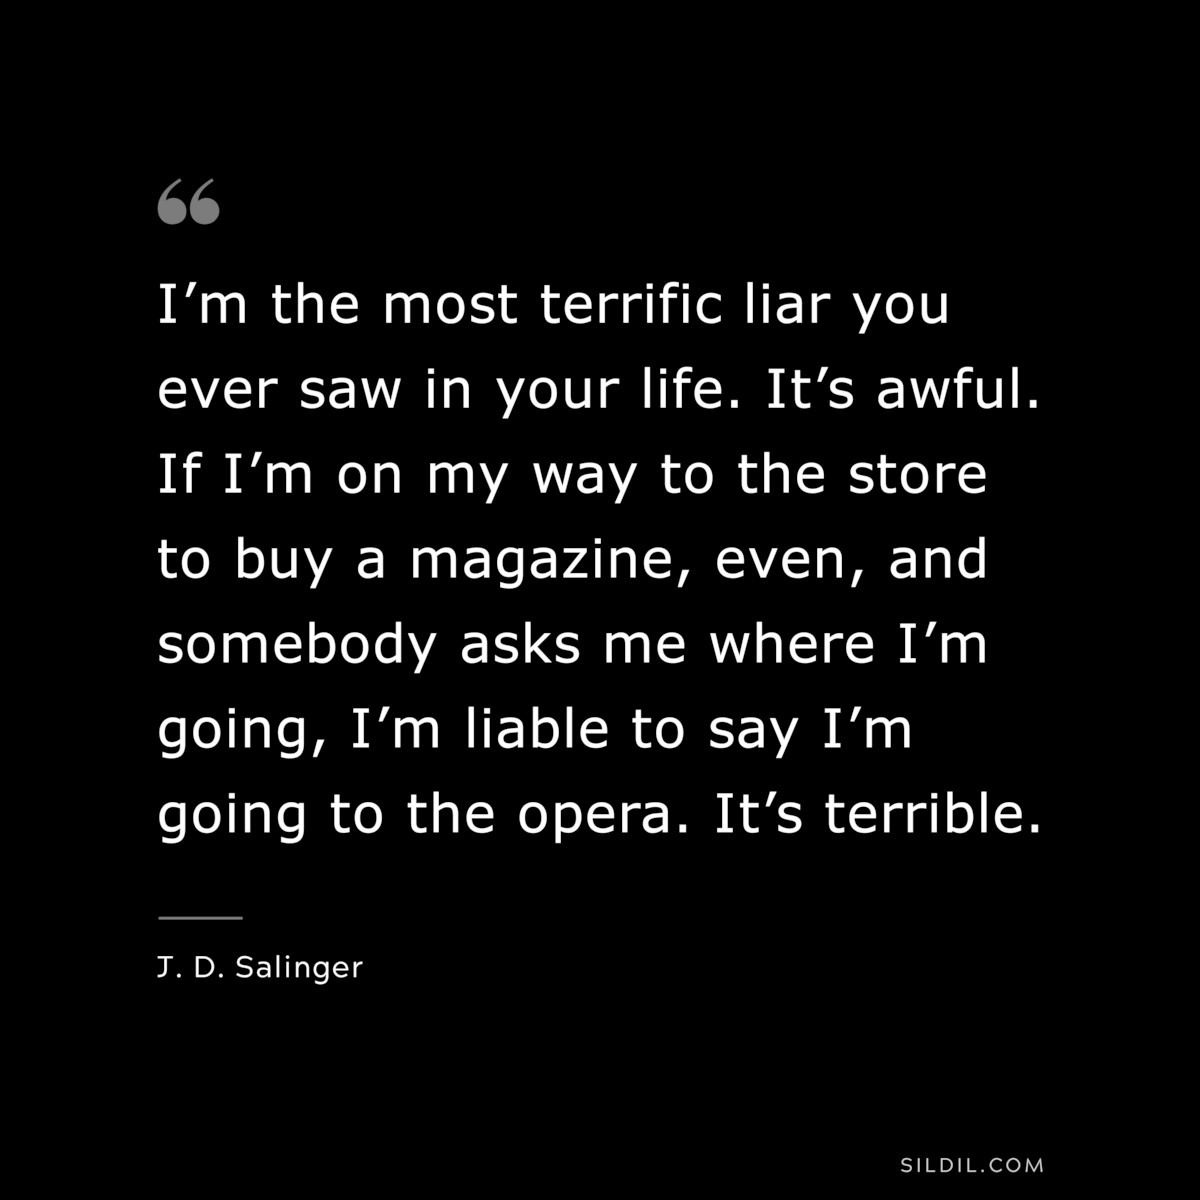 I’m the most terrific liar you ever saw in your life. It’s awful. If I’m on my way to the store to buy a magazine, even, and somebody asks me where I’m going, I’m liable to say I’m going to the opera. It’s terrible. — J. D. Salinger